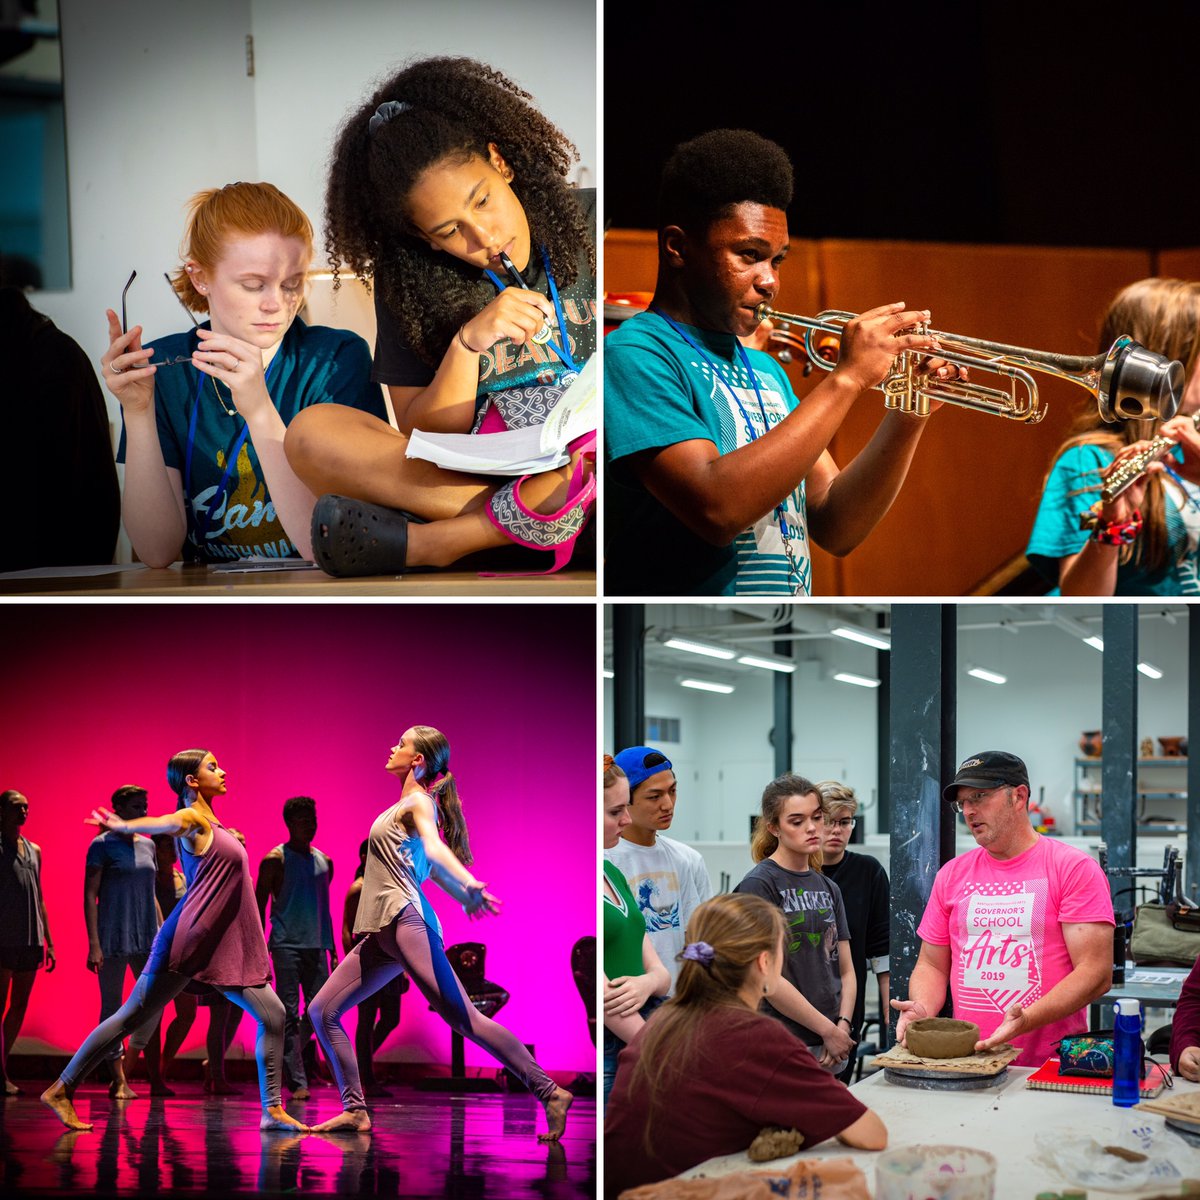 Incoming @KYGSA students, faculty, administrators talk about their thoughts now that Ky Governor’s School for the Arts goes virtual this summer. (Photos 2019.)
bit.ly/2LqVvMY
@kyperformingarts @KyTAHC @UKFineArts @JCPSKY @ShawneeAcademy @YPASmusic
#ArtsKy #ArtsEducaton